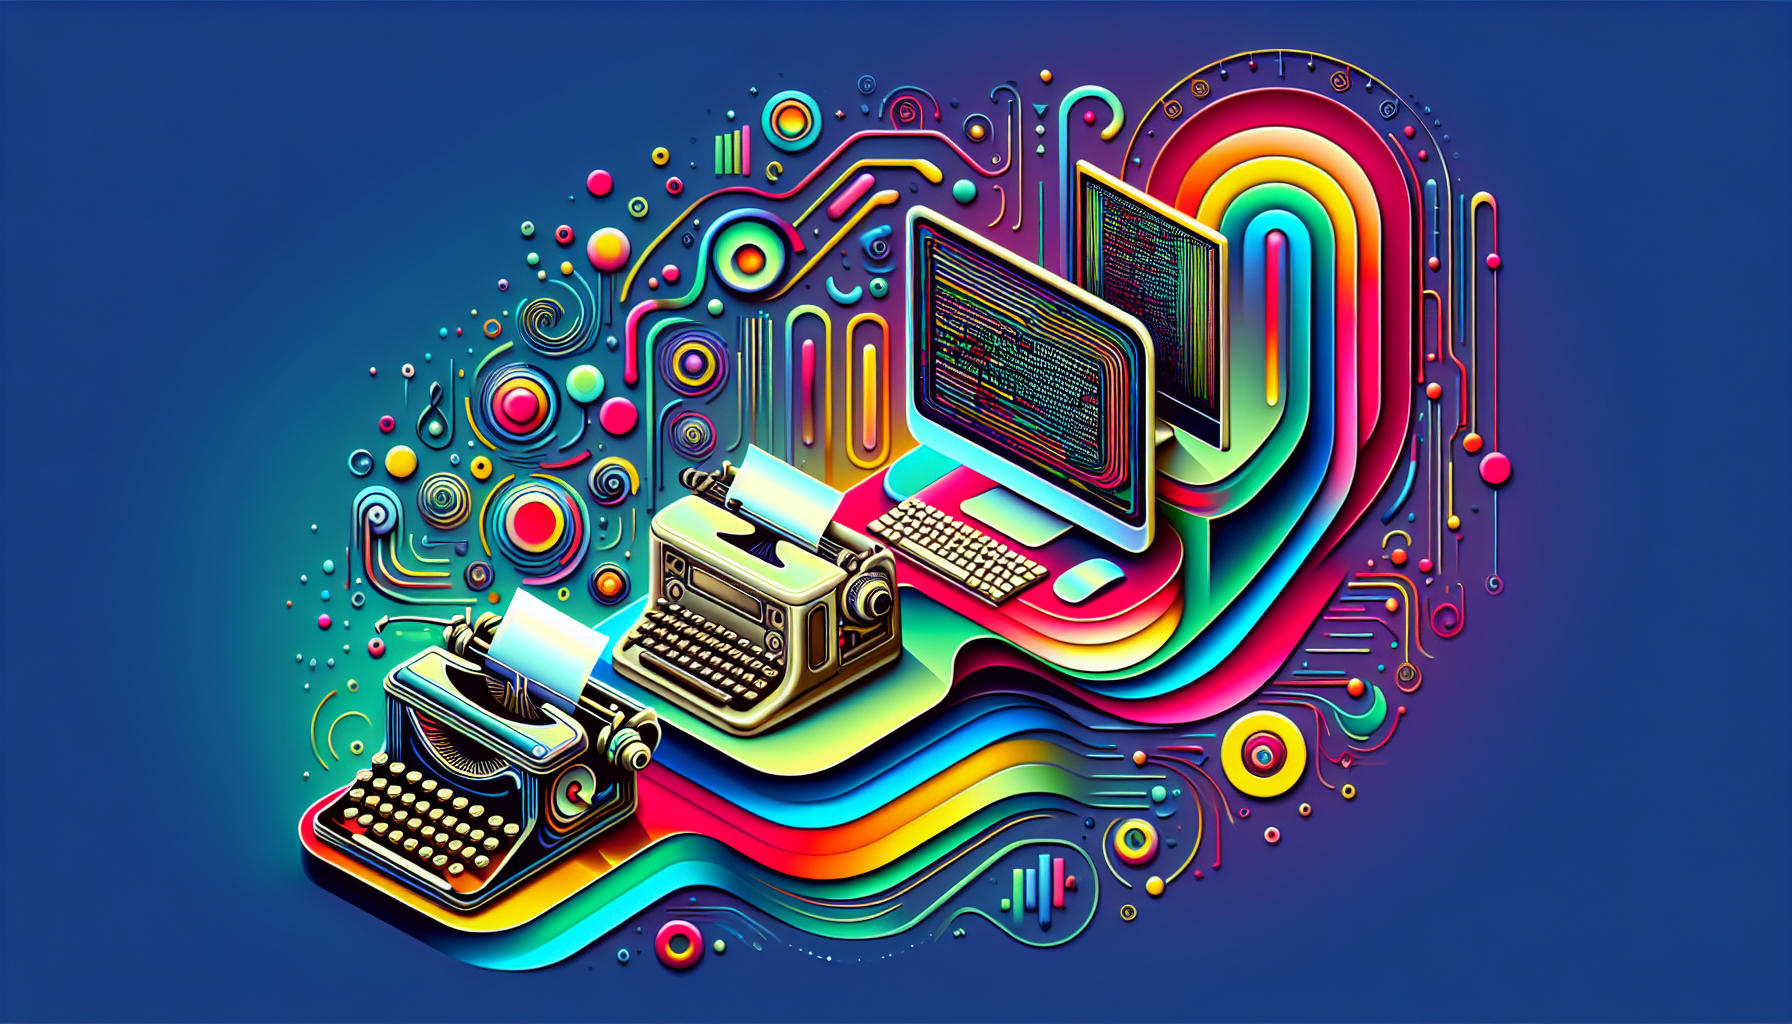 A modern and colorful conceptual image illustrating the evolution of Artificial Intelligence in screenwriting. Starting from the left, represent a simple, older model typewriter indicating the earliest form of screenwriting. Progressing to the center, show a more advanced computer with dated software to denote the digital age. Finally, depict a futuristic, sleek device implying AI's role in future screenwriting. Use abstract shapes and vivid colors to visually portray the leaps between these stages.